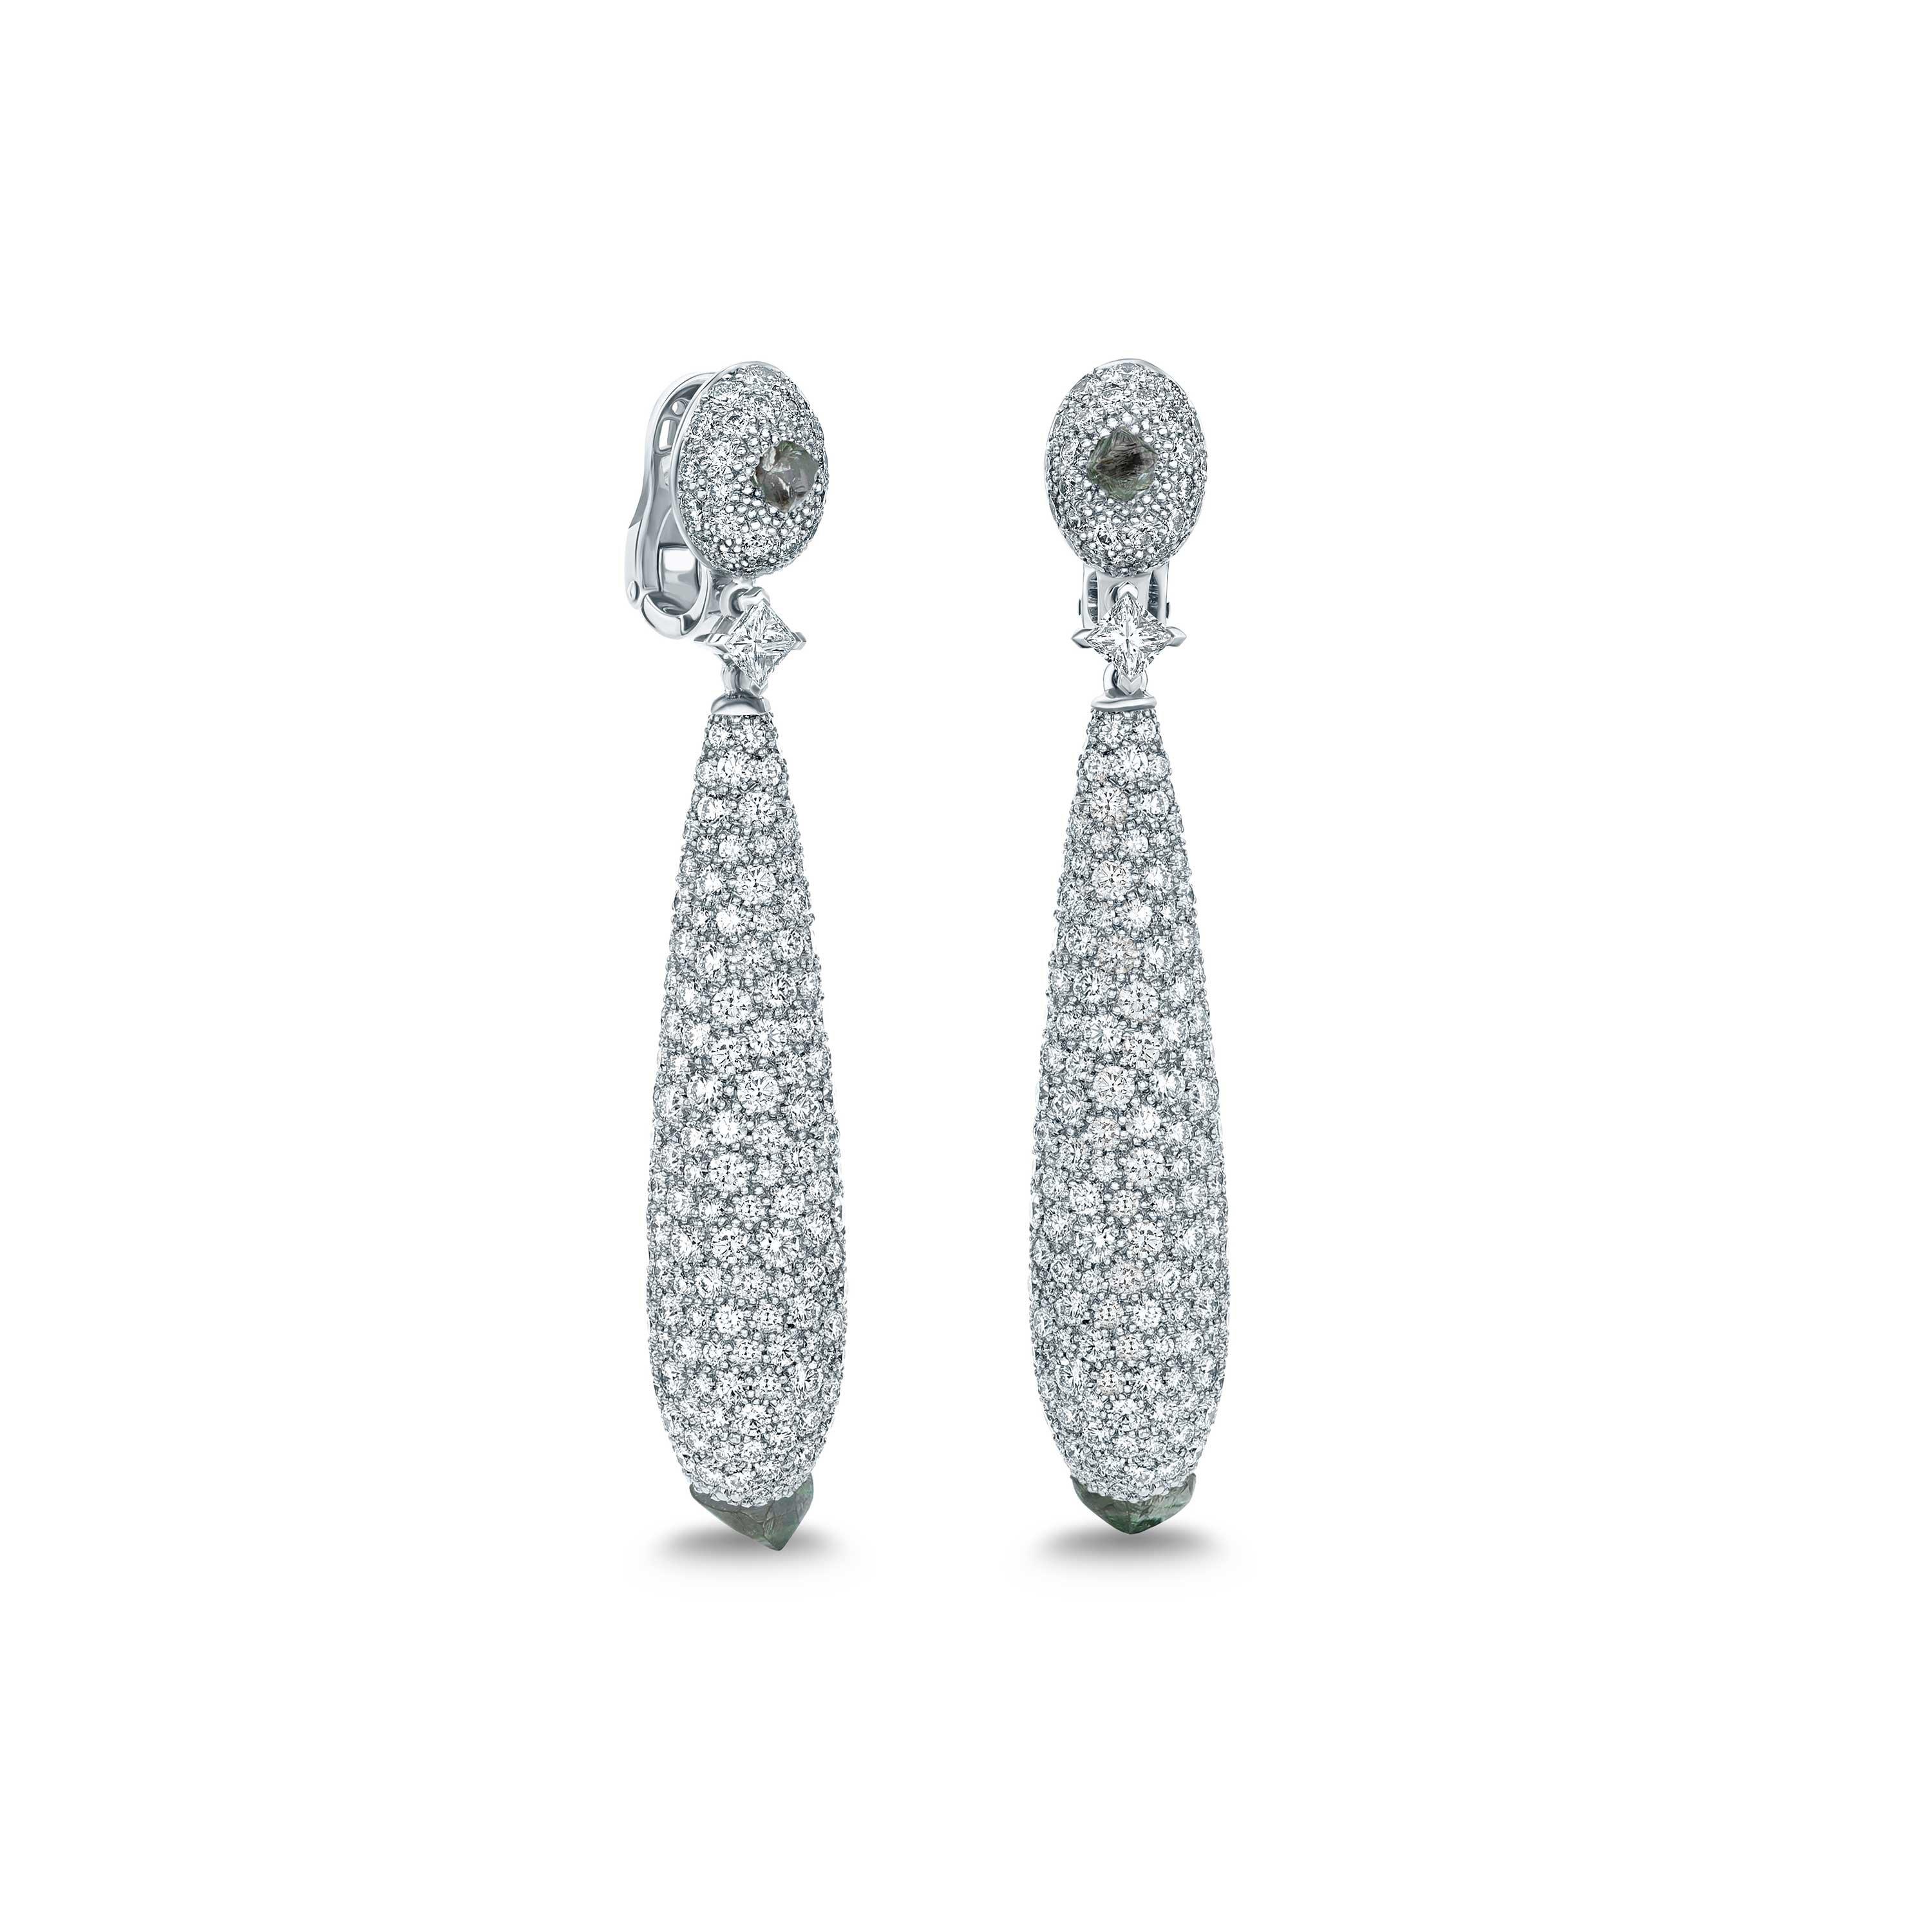 Talisman cocktail earrings in white gold, image 1